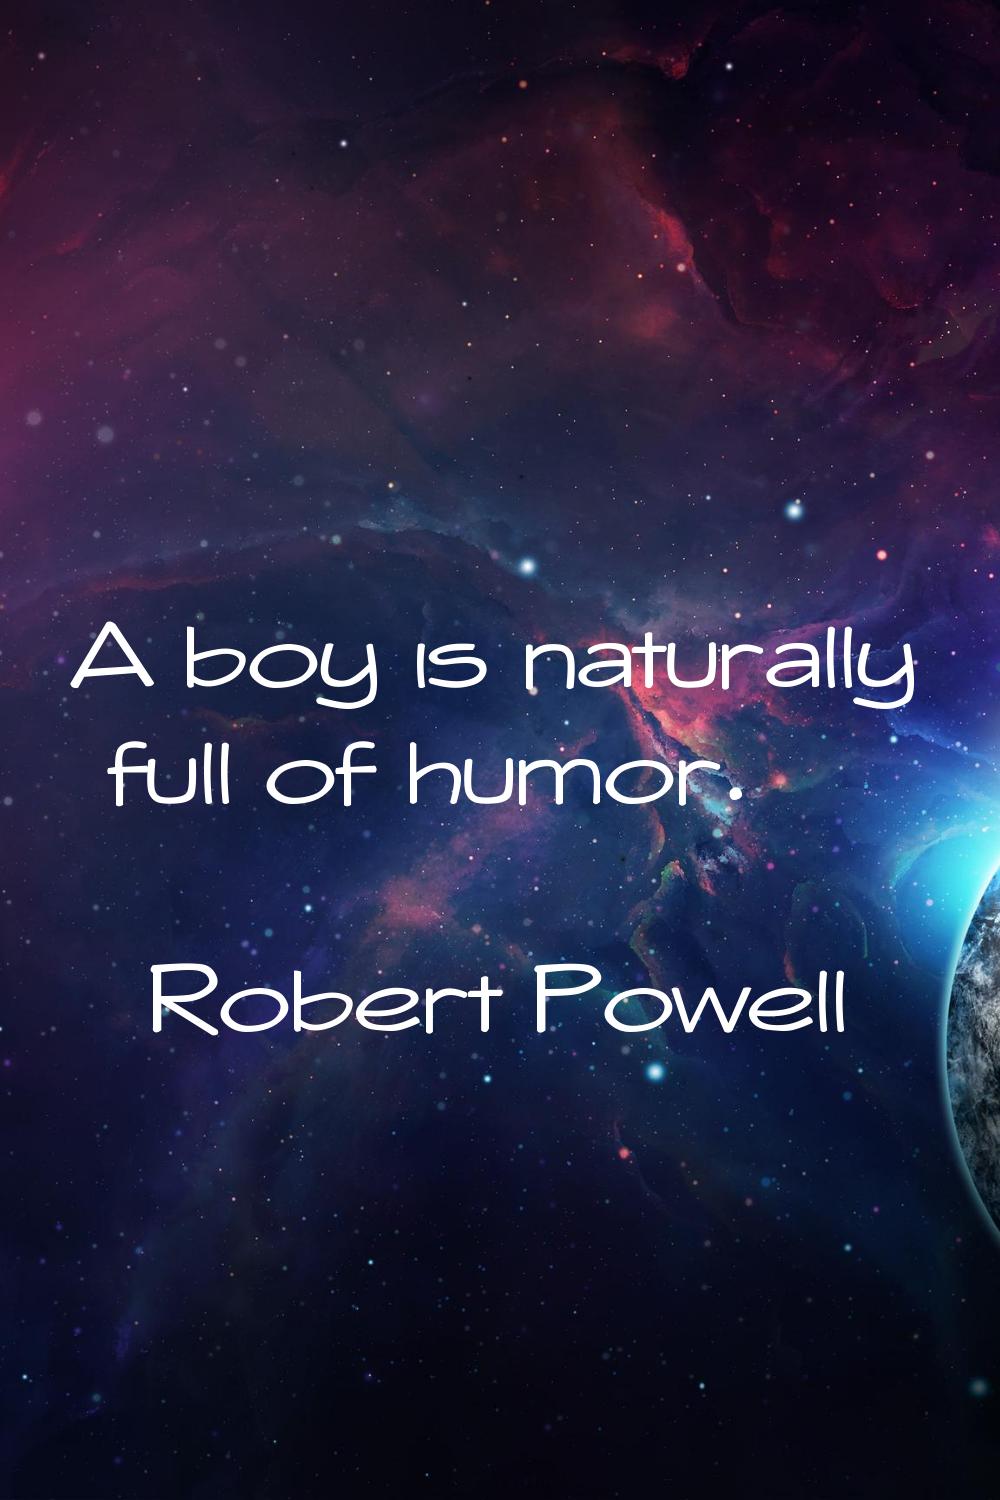 A boy is naturally full of humor.